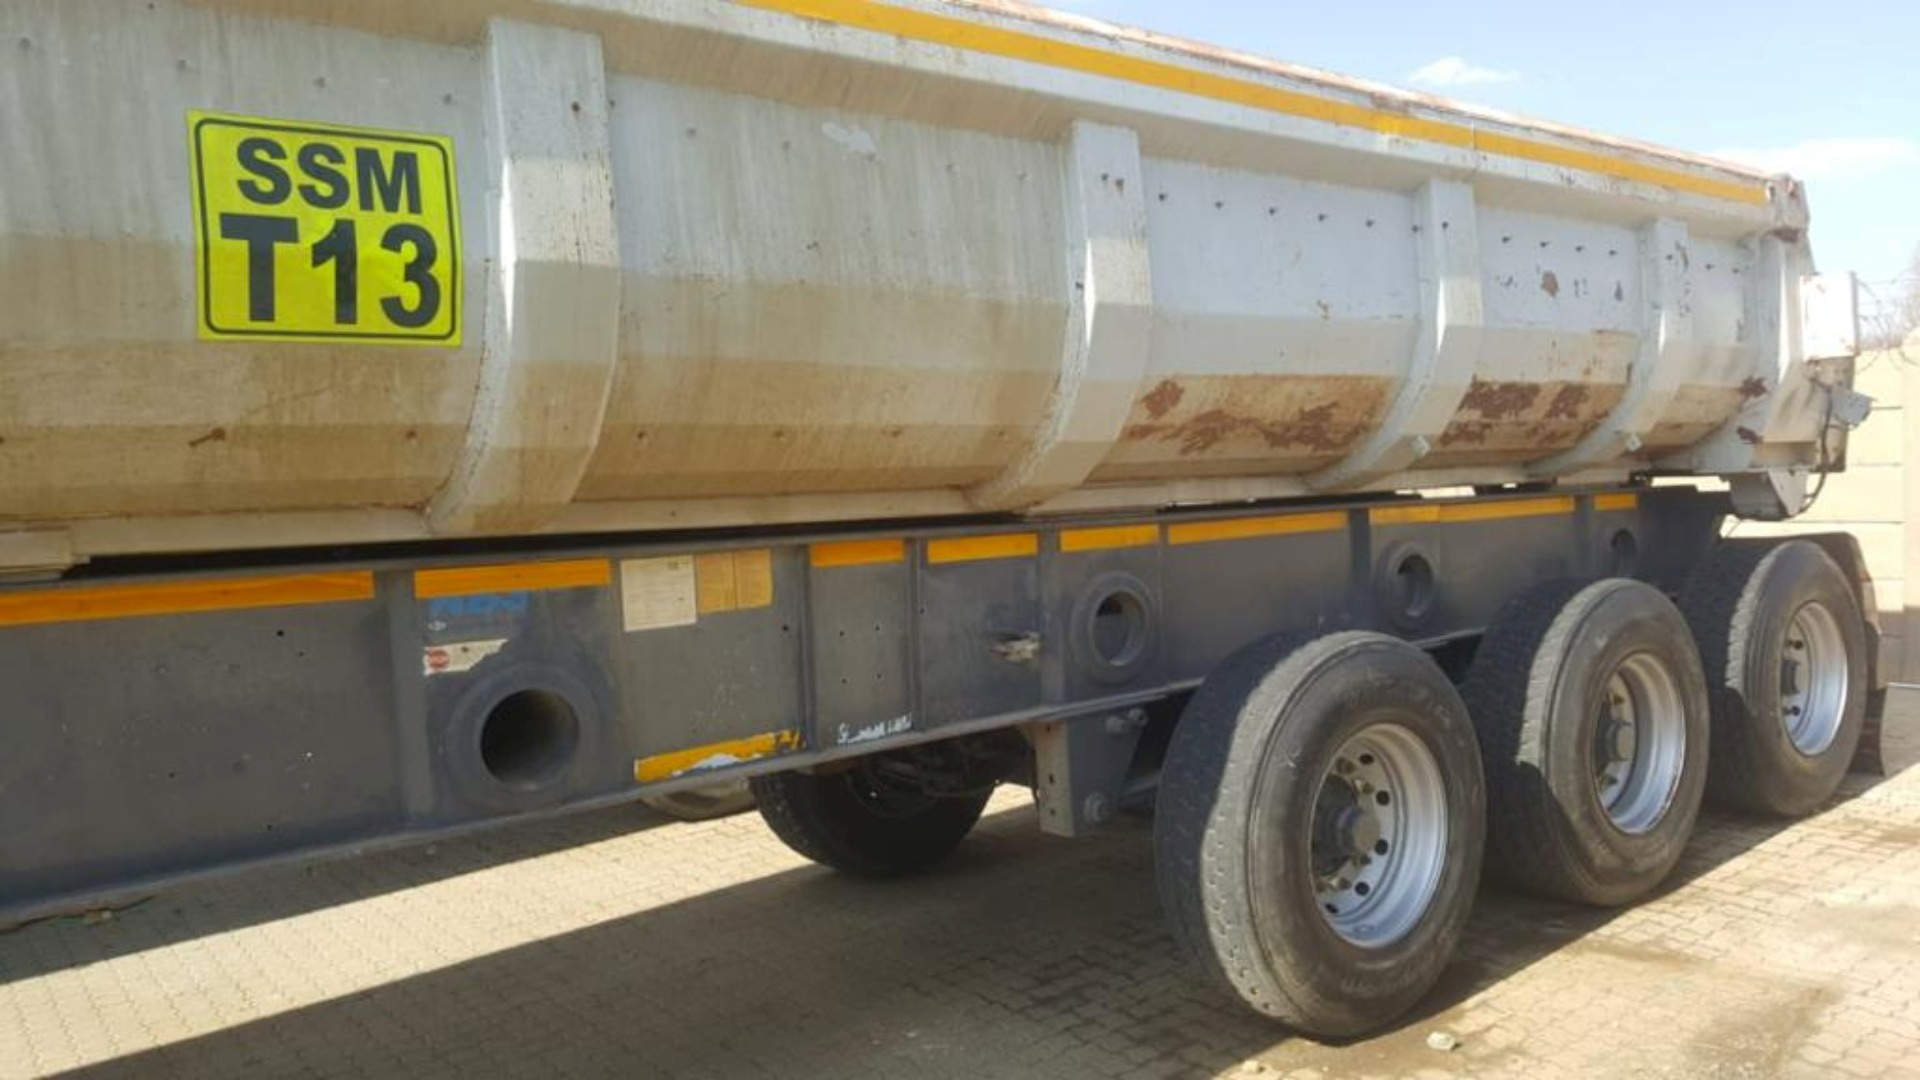 Afrit Trailers 2011 Afrit Tipper Trailer 2011 for sale by Interdaf Trucks Pty Ltd | Truck & Trailer Marketplaces